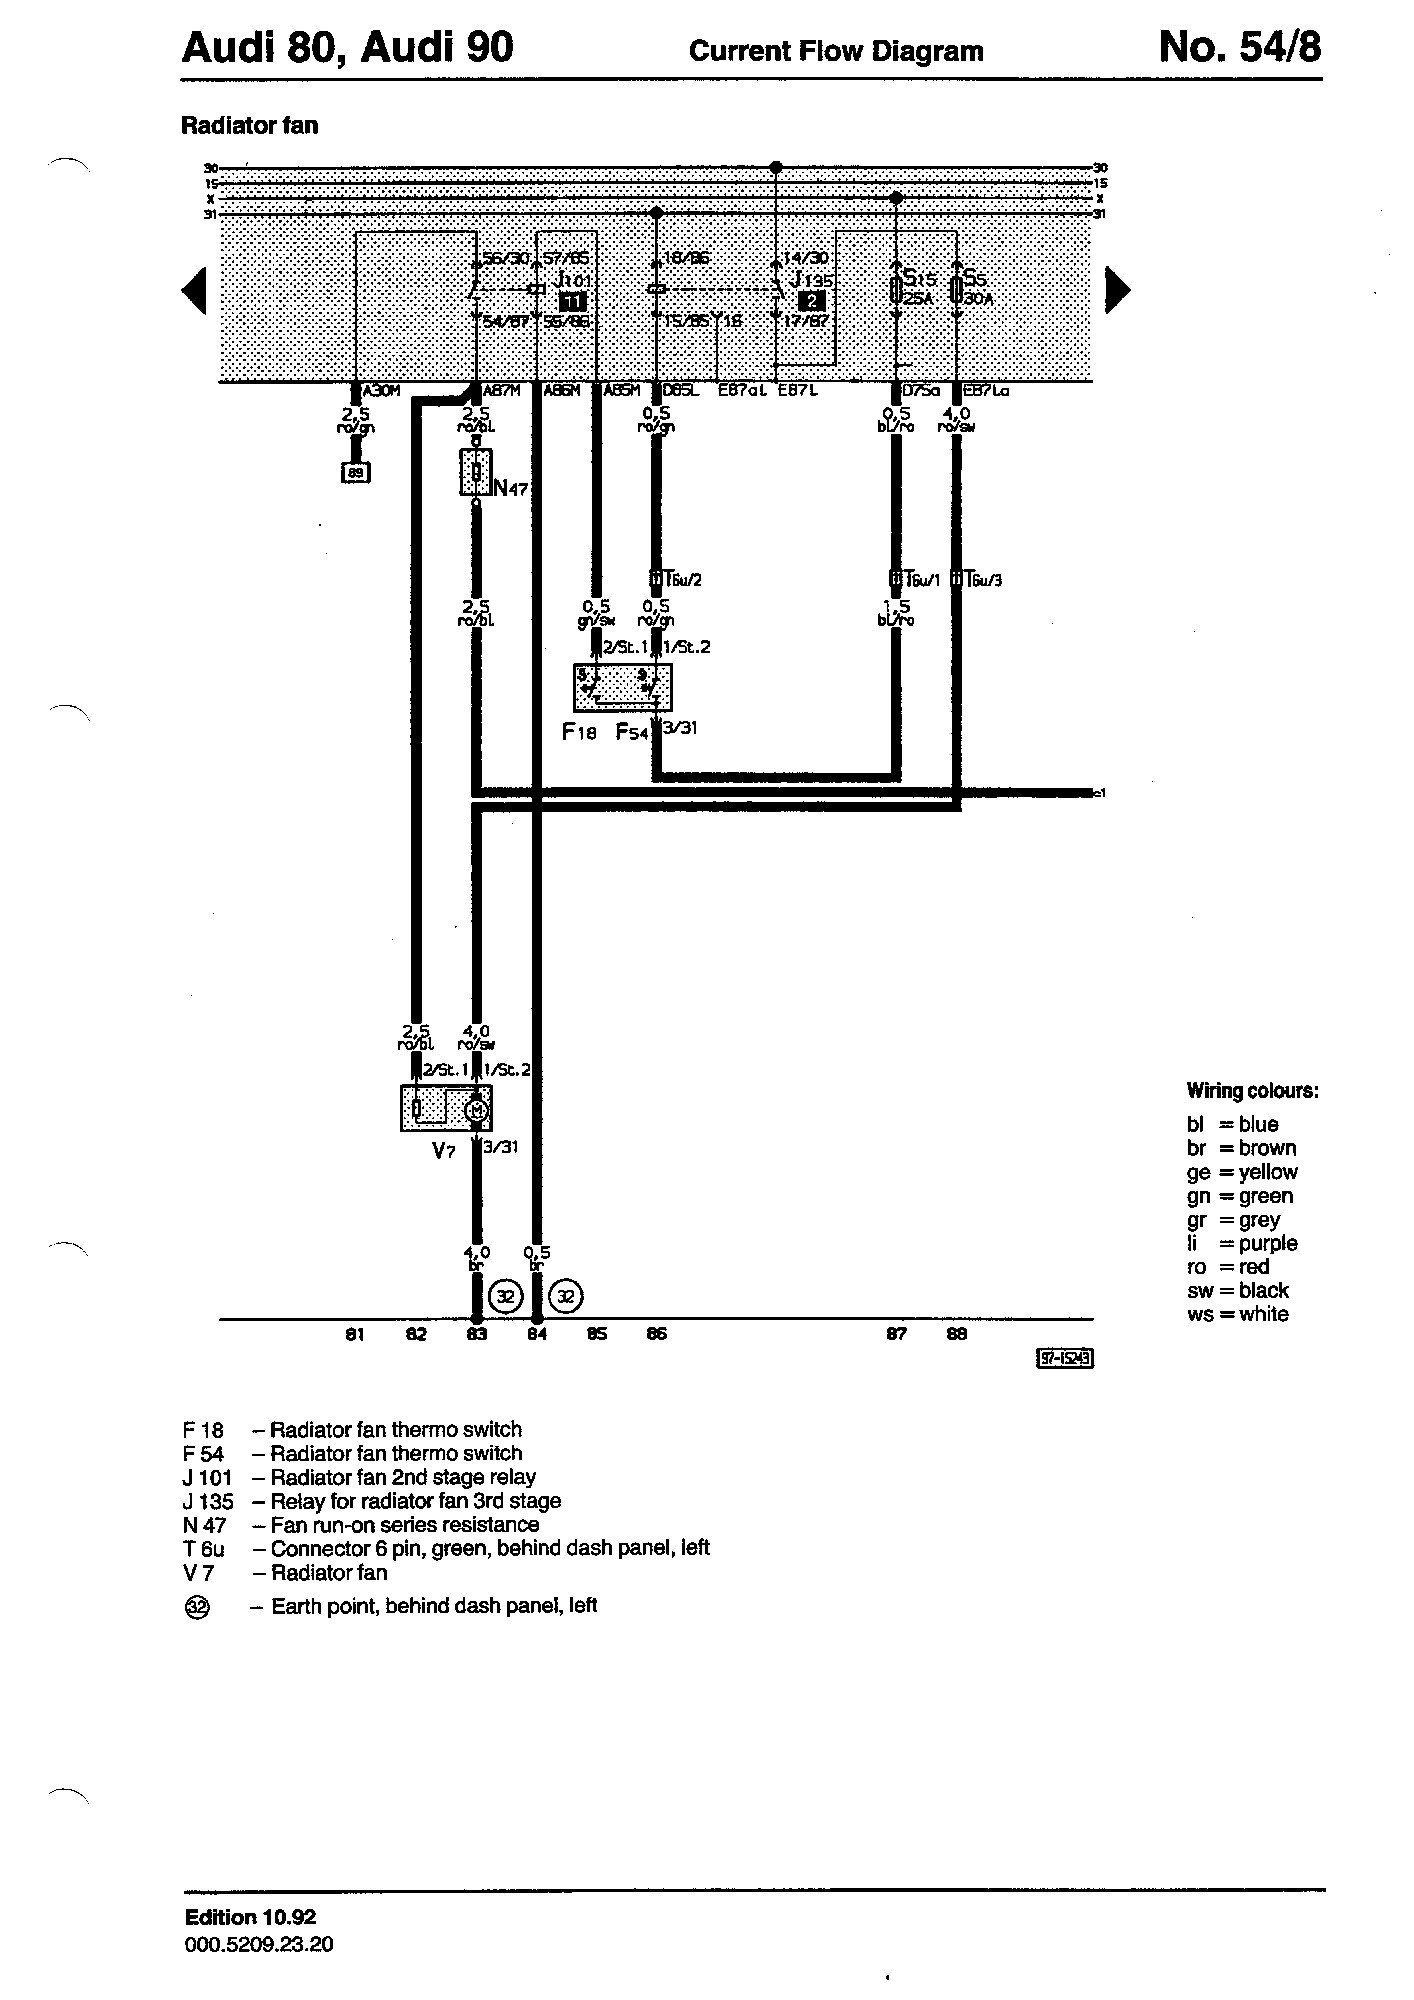 Wiring Diagram for Ge Rr7 Relay Best Fancy Hvac Potential Relay Wiring Diagram Electrical